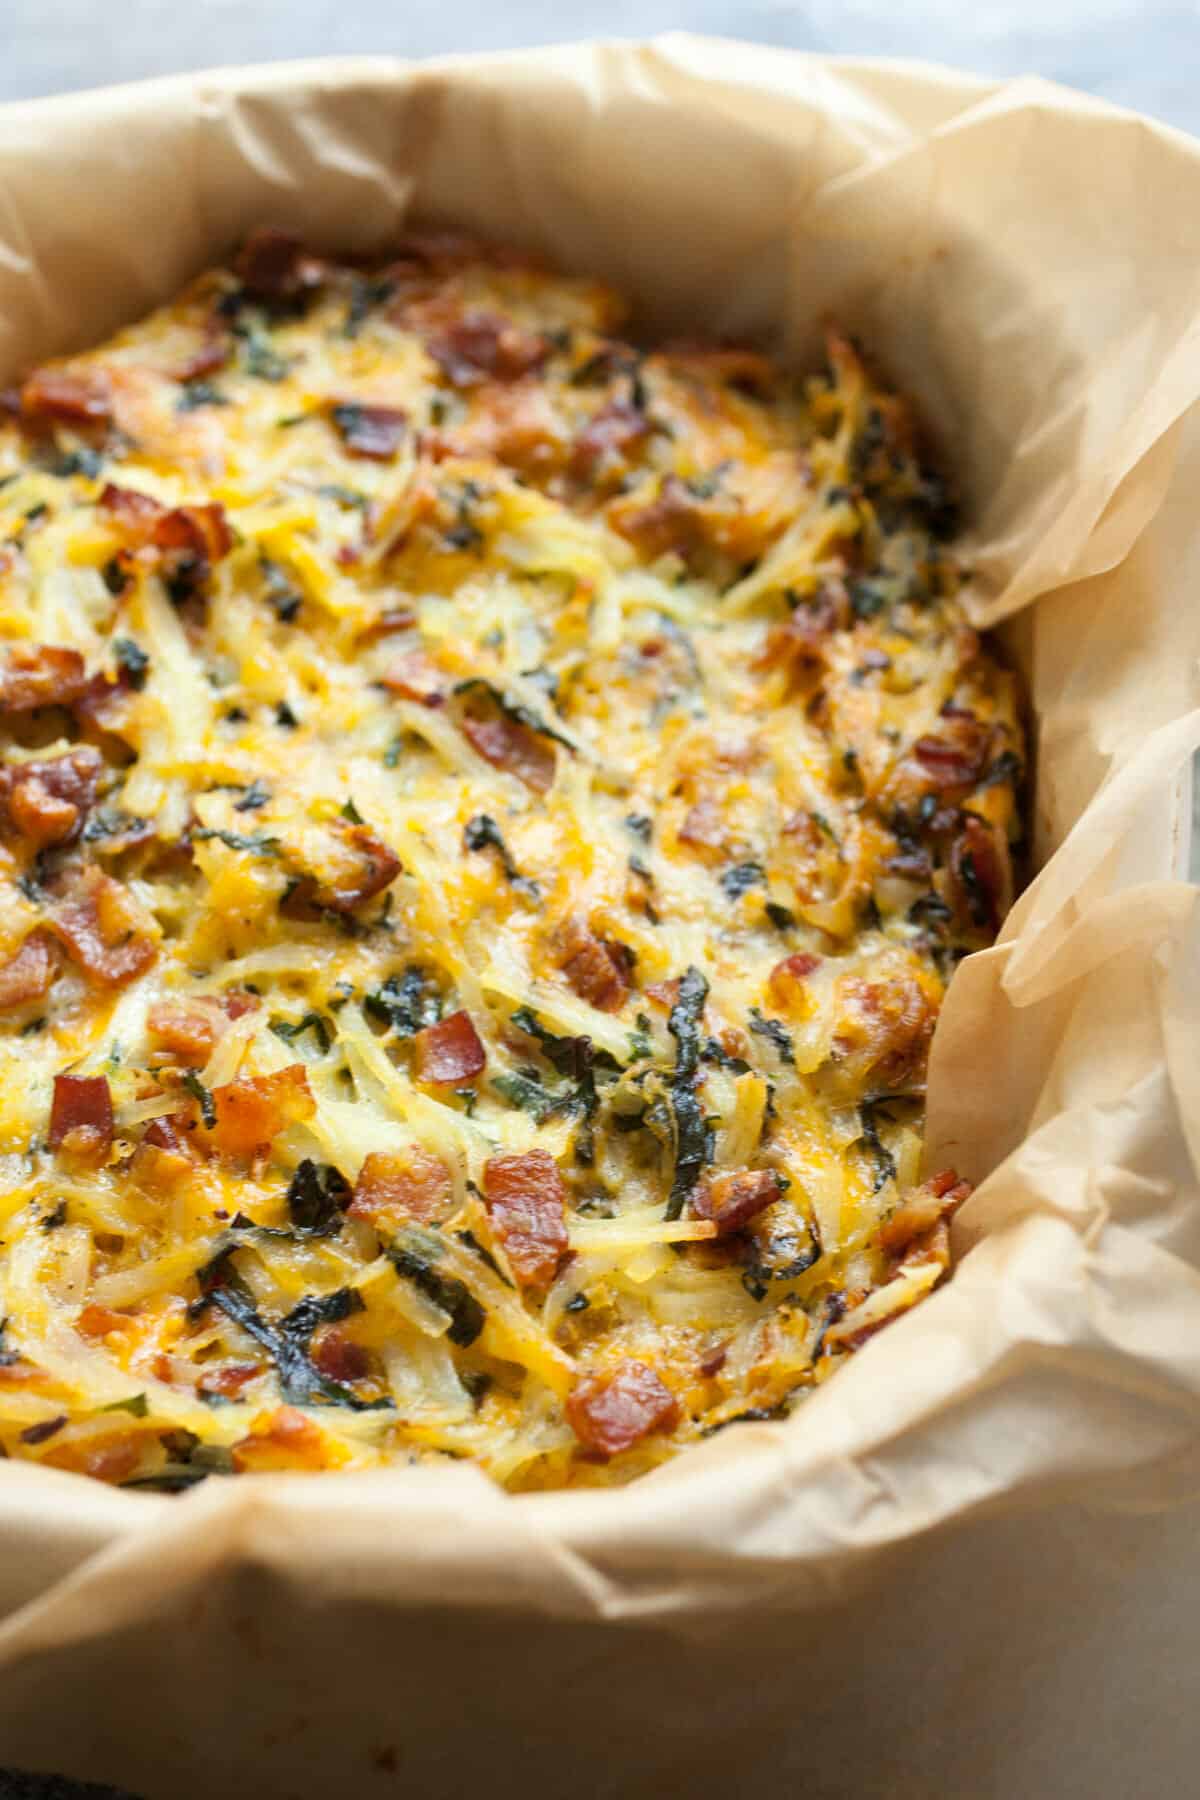 Potato Breakfast Pie with Bacon and Kale: An all-in one Brunch masterpiece, this pie is everything you want in a breakfast dish. Shredded potatoes, bacon, veggies, and just enough cheese and egg to hold it together. Make it, eat it, freeze any leftovers! | macheesmo.com